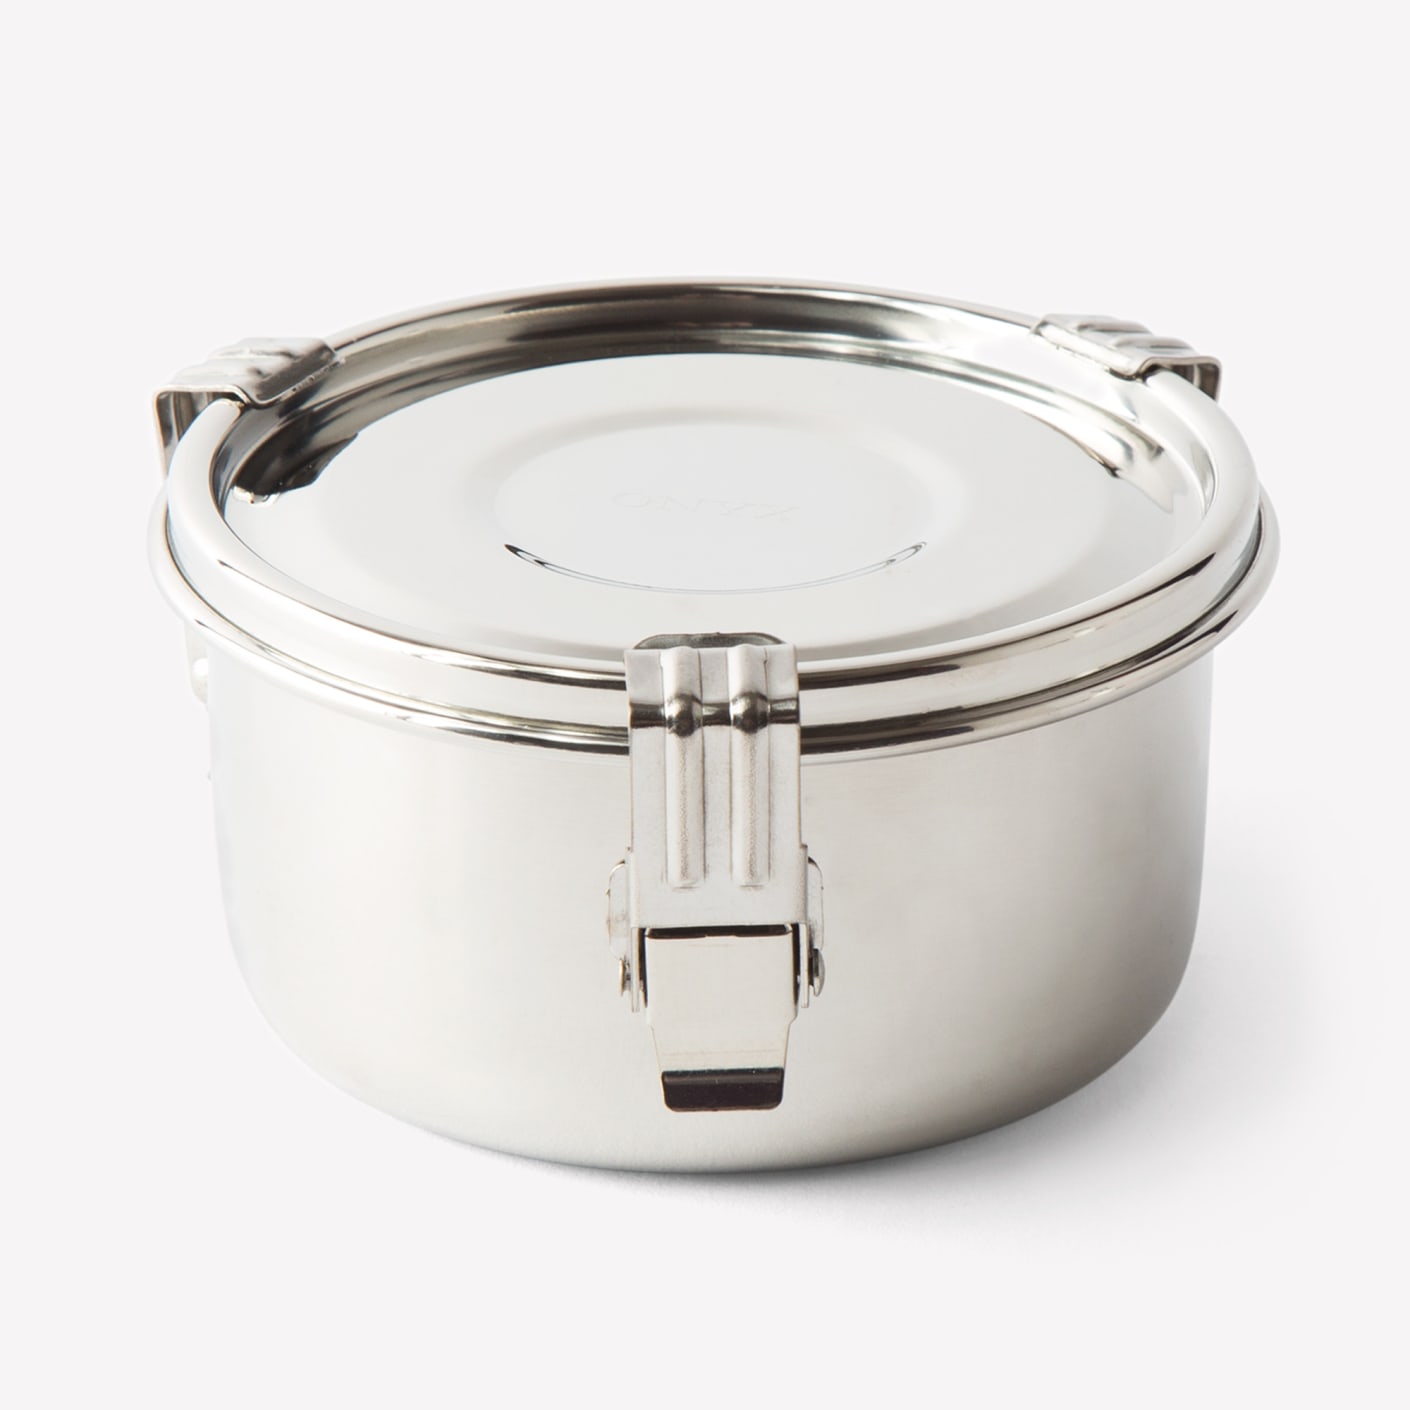 Onyx Airtight Stainless Steel Container, 10 cm | Bespoke Post